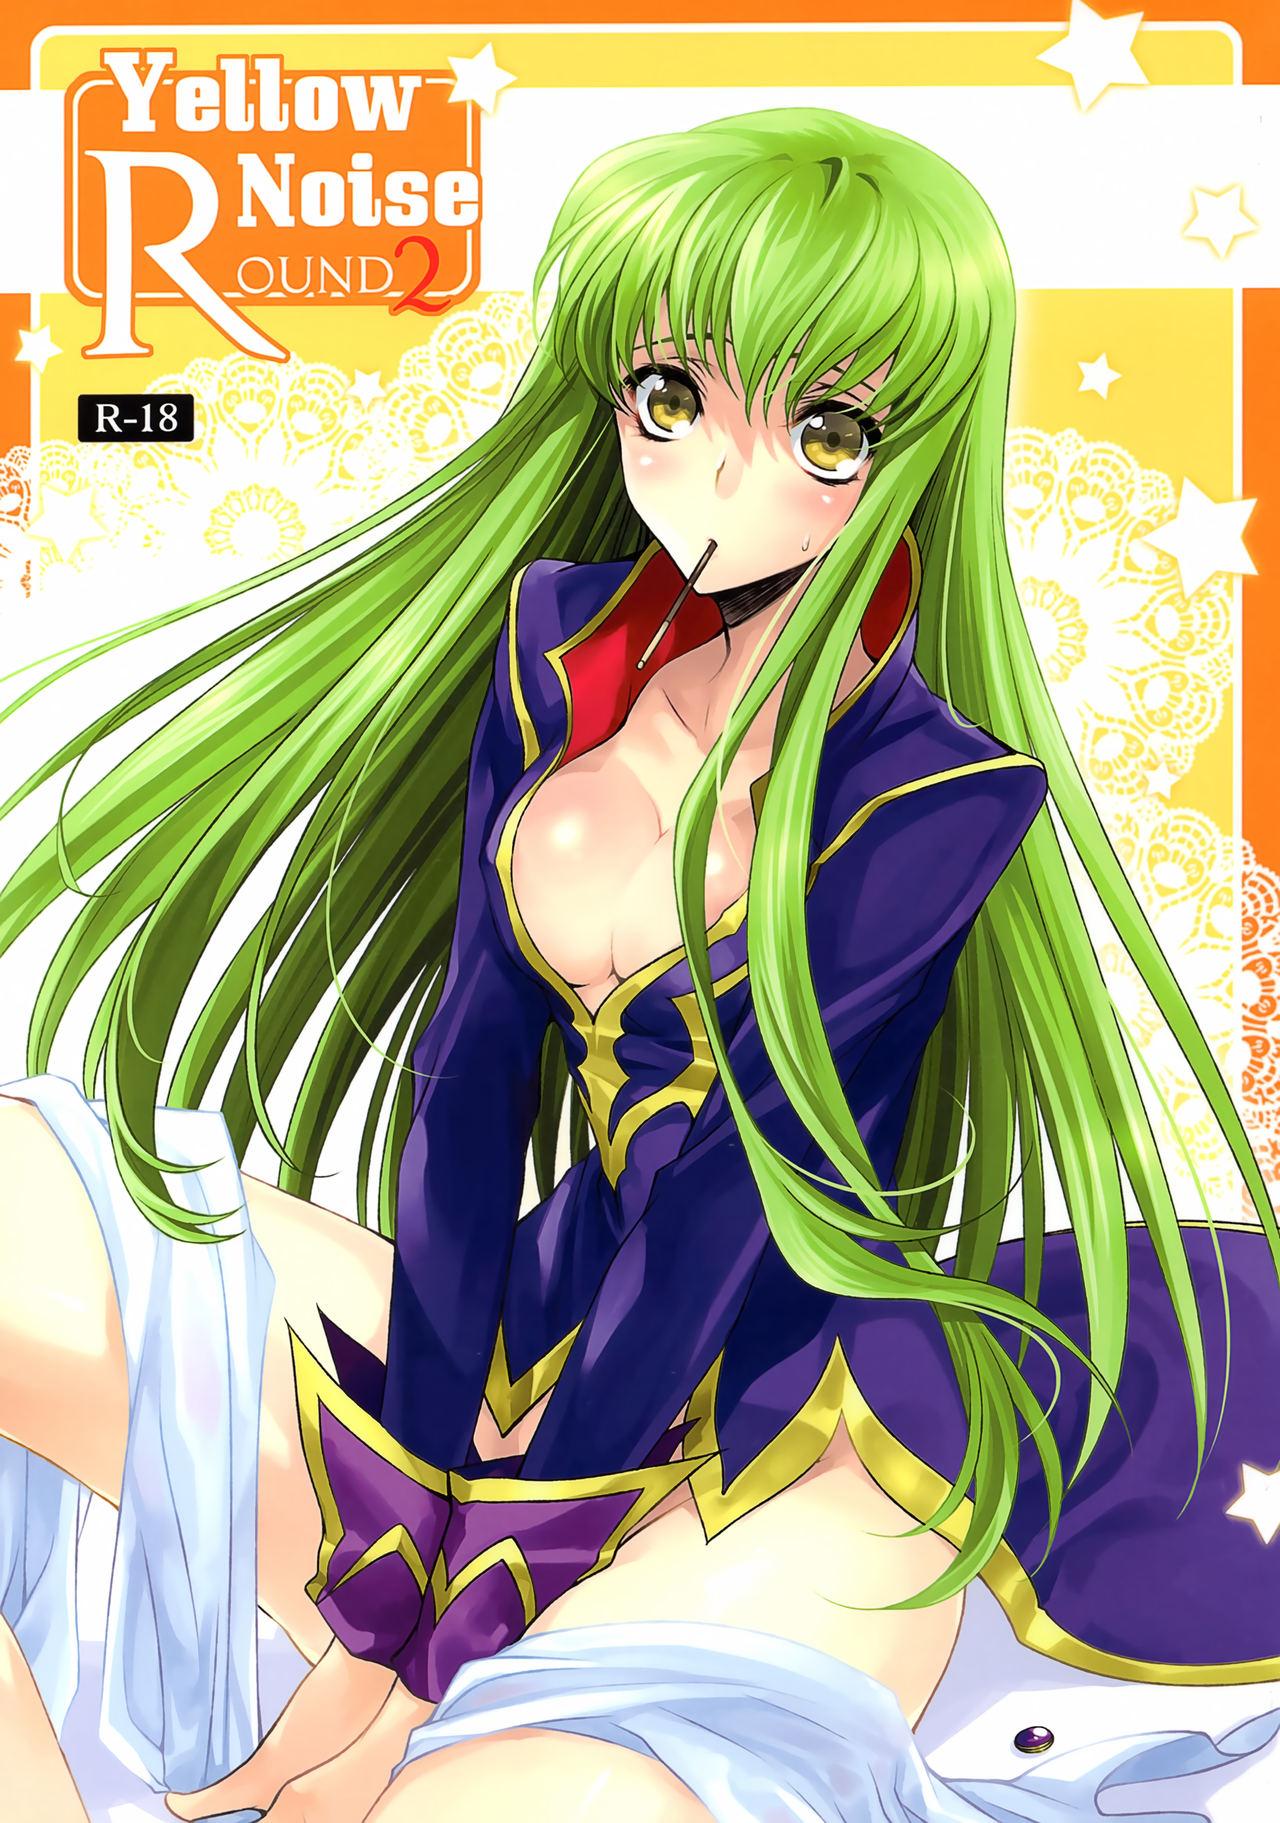 Stepdaughter YELLOW NOISE Round 2 - Code geass Tiny - Picture 1